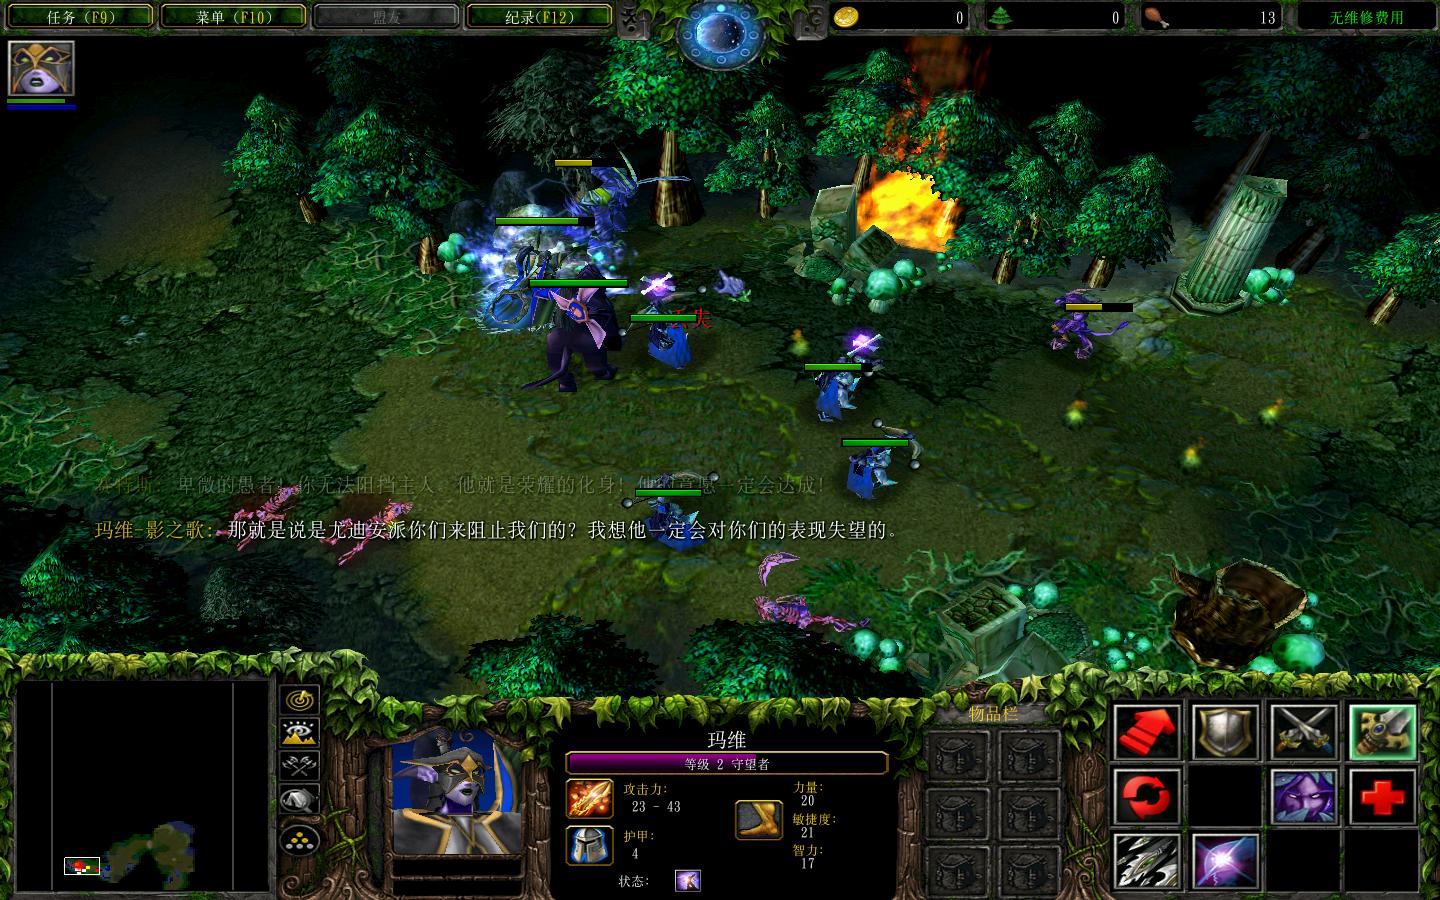 ħ3Warcraft III The Frozen Thronev1.24Ԫv1.24